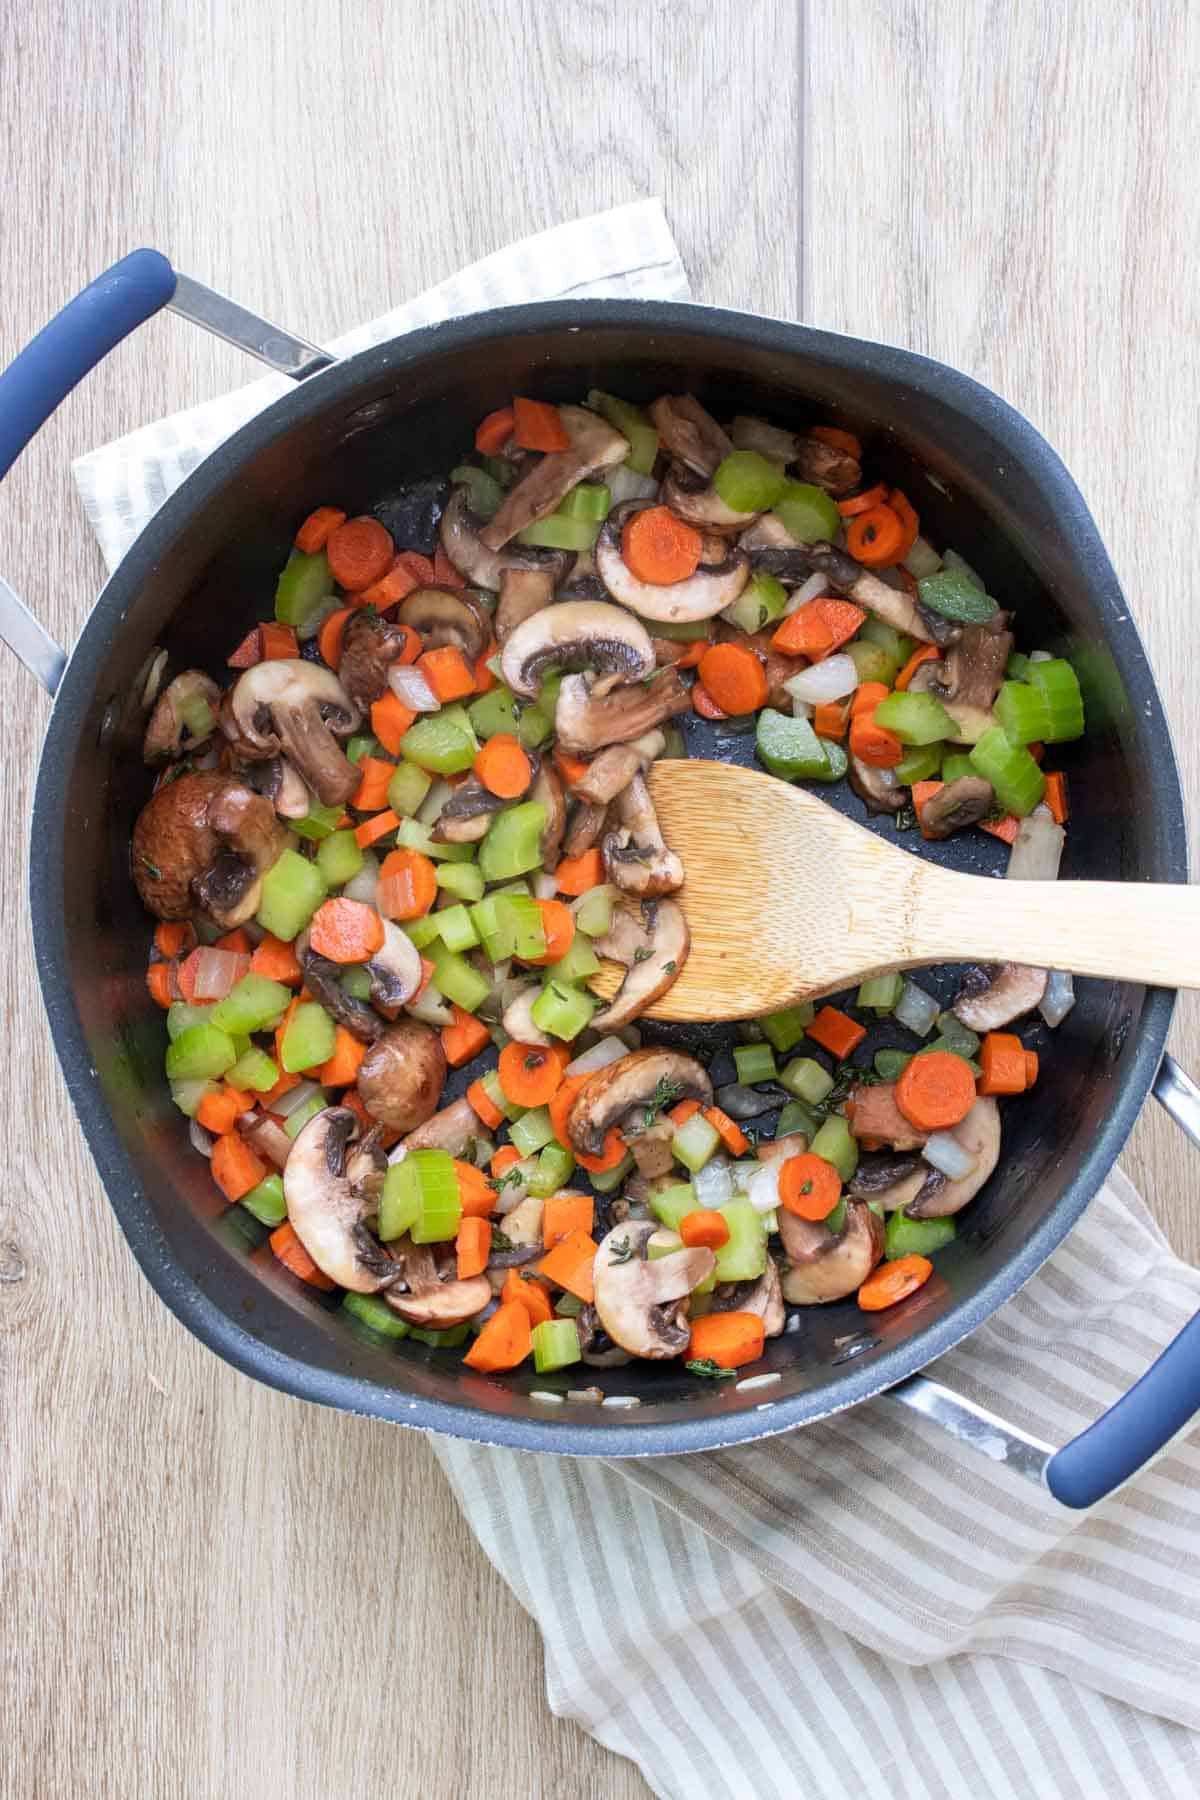 Top view of a wooden spoon mixing chopped carrots, celery and mushrooms in a black pot